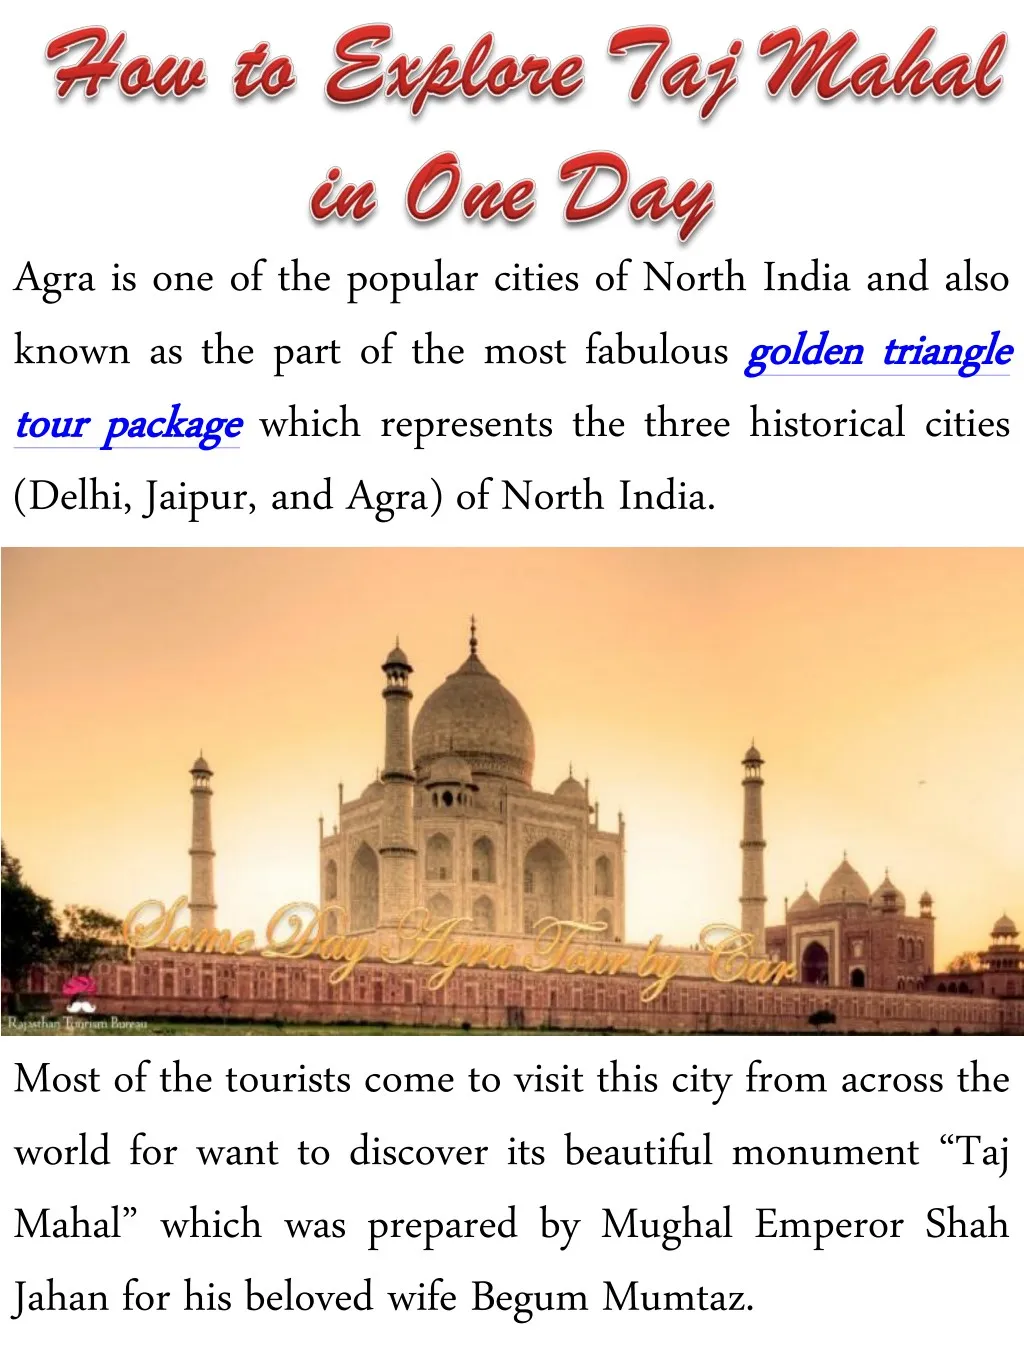 agra is one of the popular cities of north india